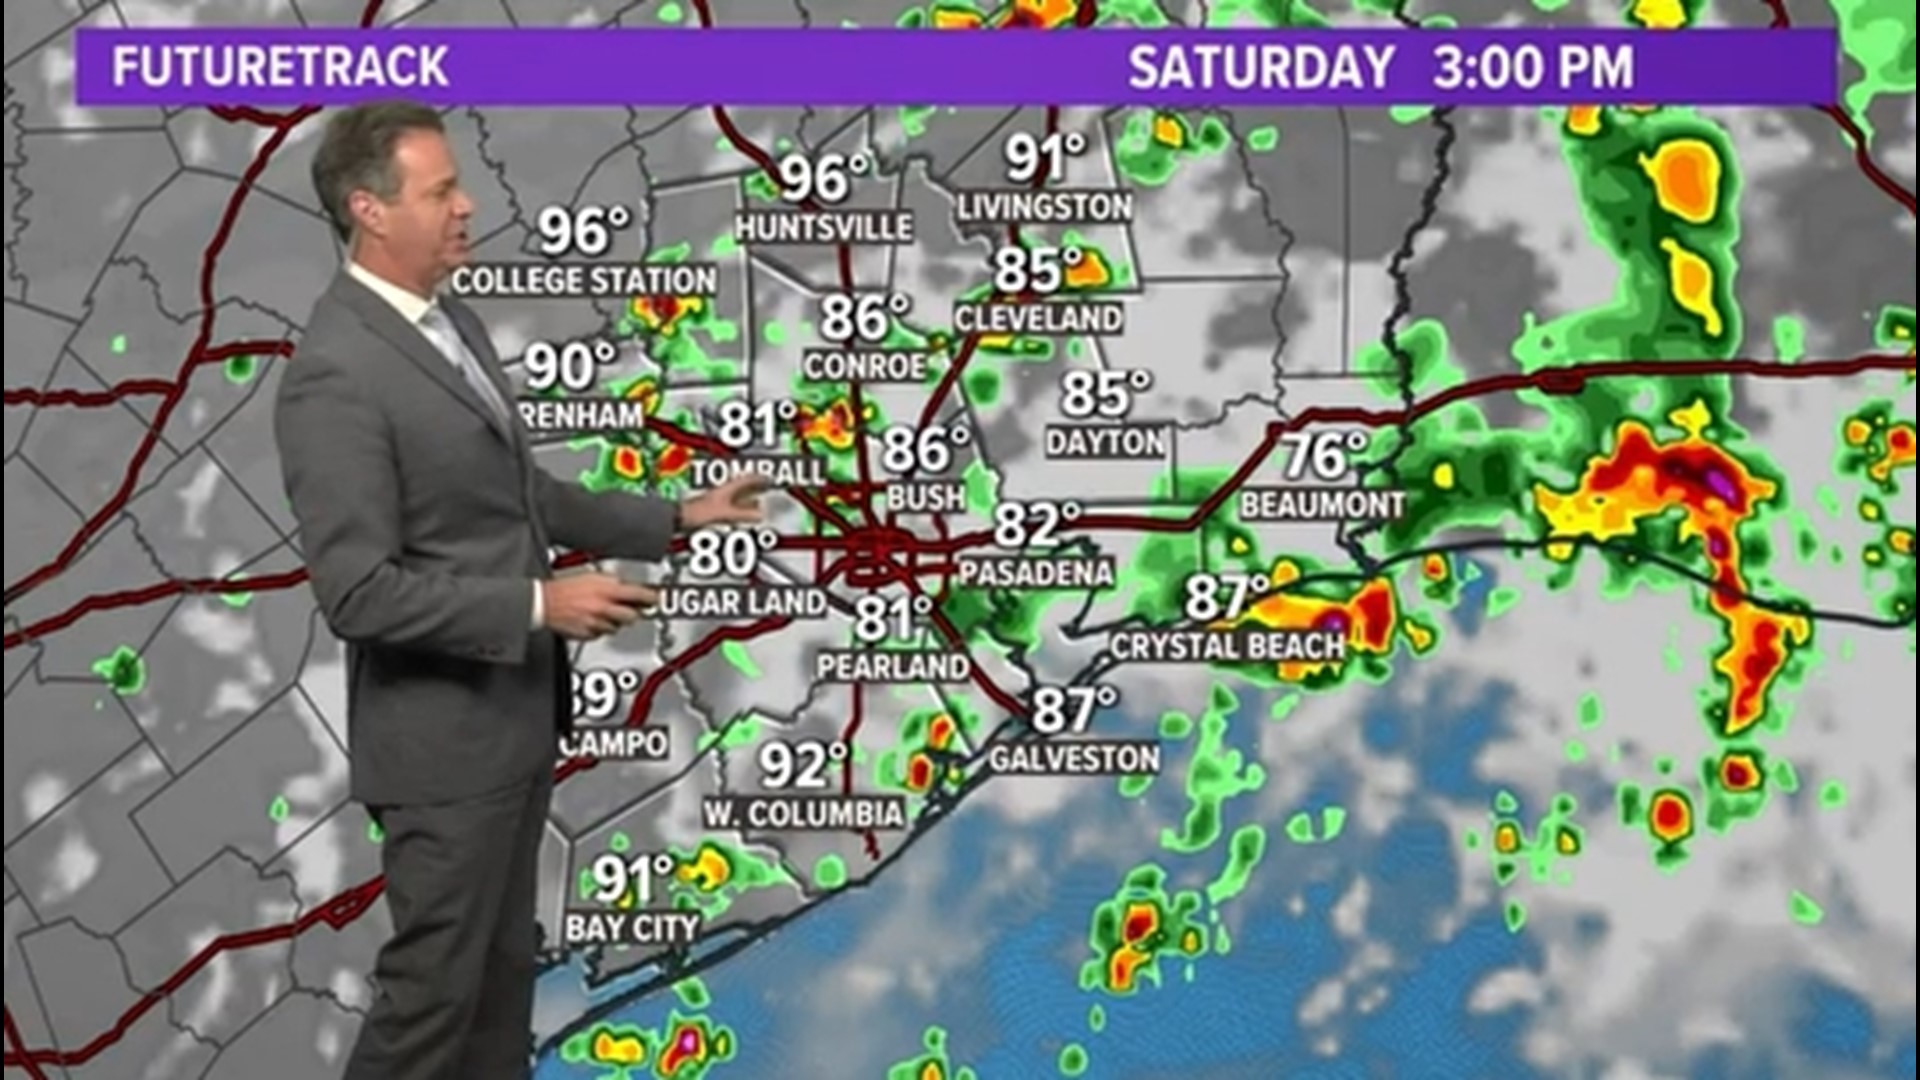 Expect scattered showers for the majority of the day Saturday.